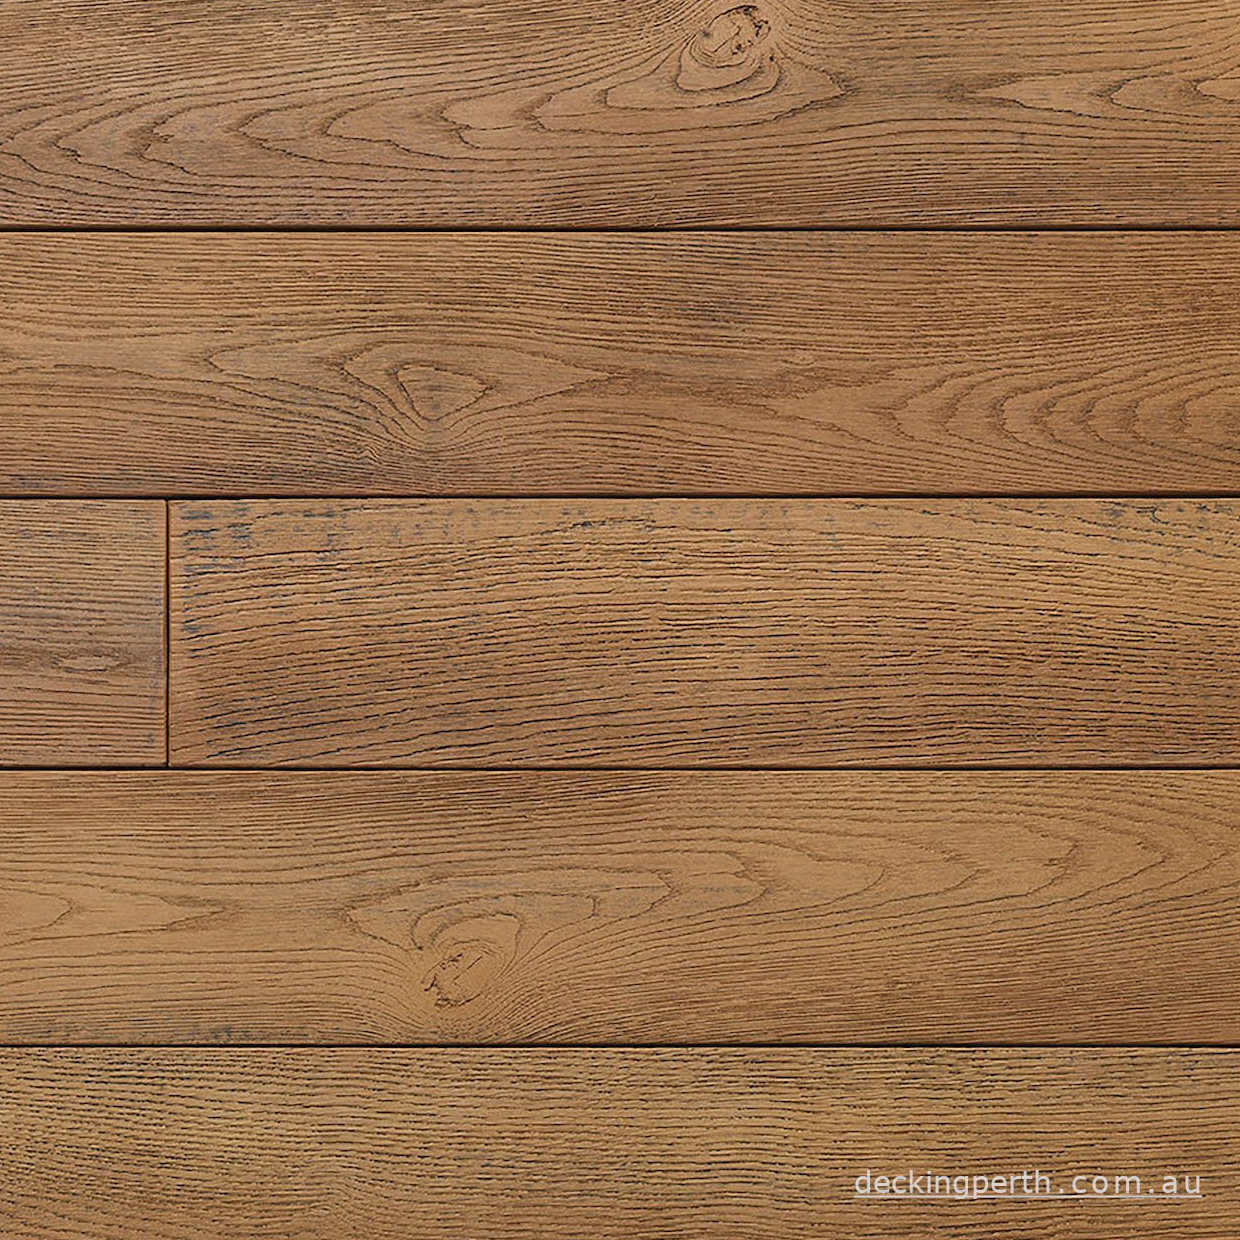 MILLBOARD_50_x_32mm_Square_Edging_Coppered_Oak_3.2m_Decking_Perth